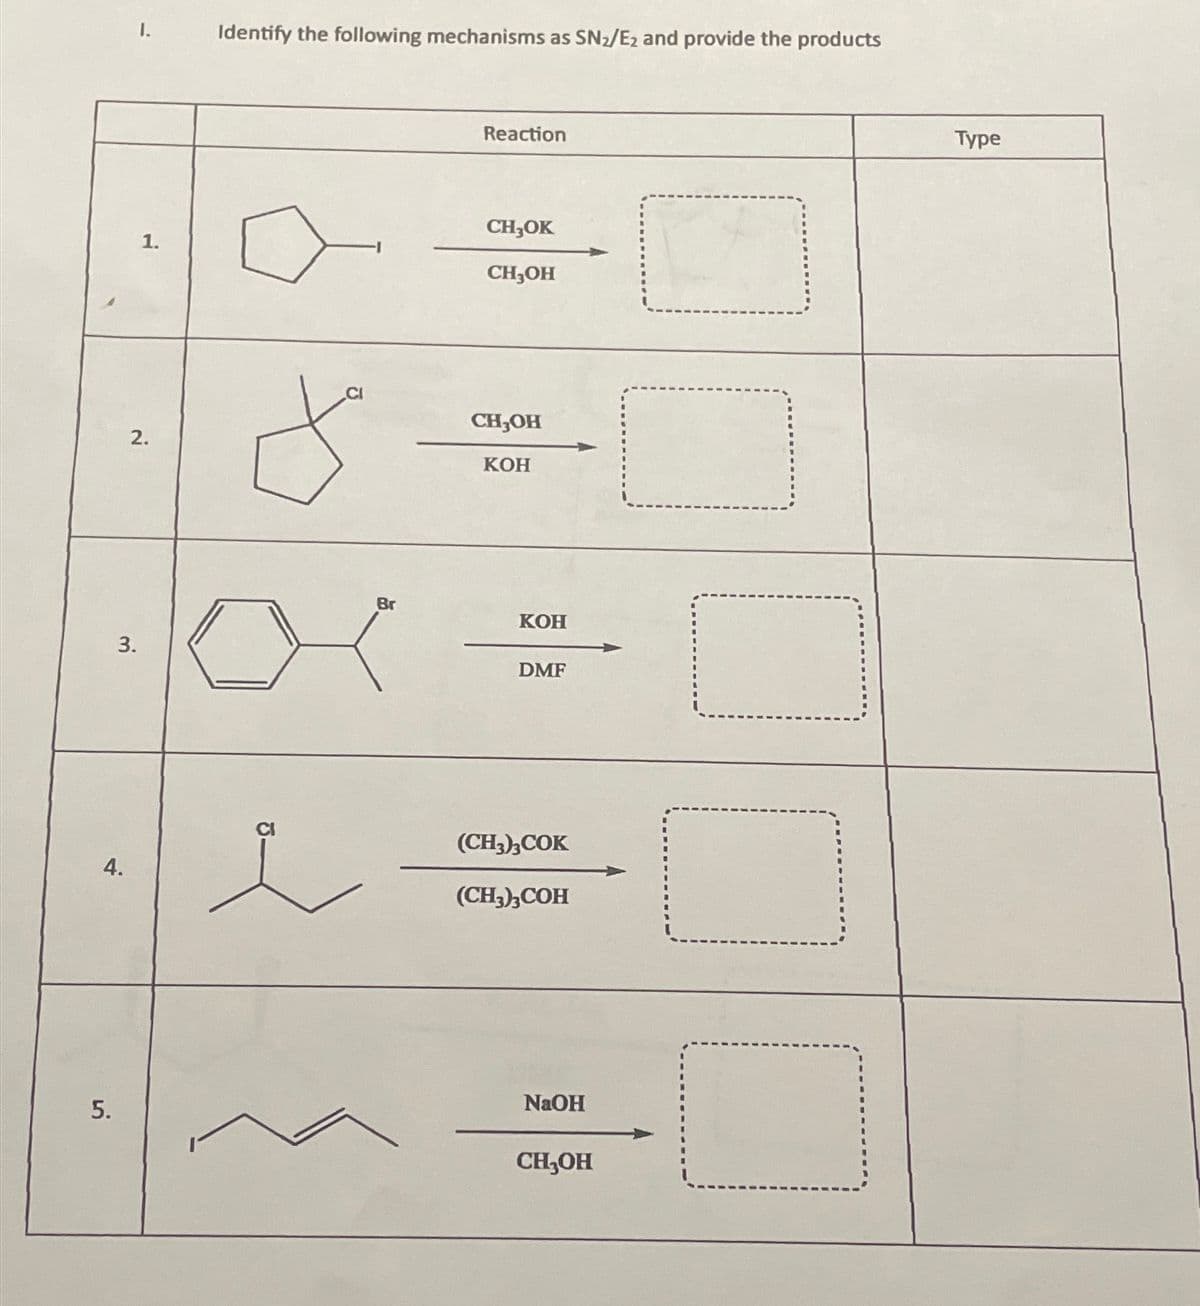 1.
Identify the following mechanisms as SN2/E2 and provide the products
Reaction
CH₂OK
1.
CH3OH
2.
と
CH3OH
KOH
3.
4.
3.
Br
KOH
DMF
(CH3)3COK
(CH3)3COH
5.
NaOH
CH₂OH
Type